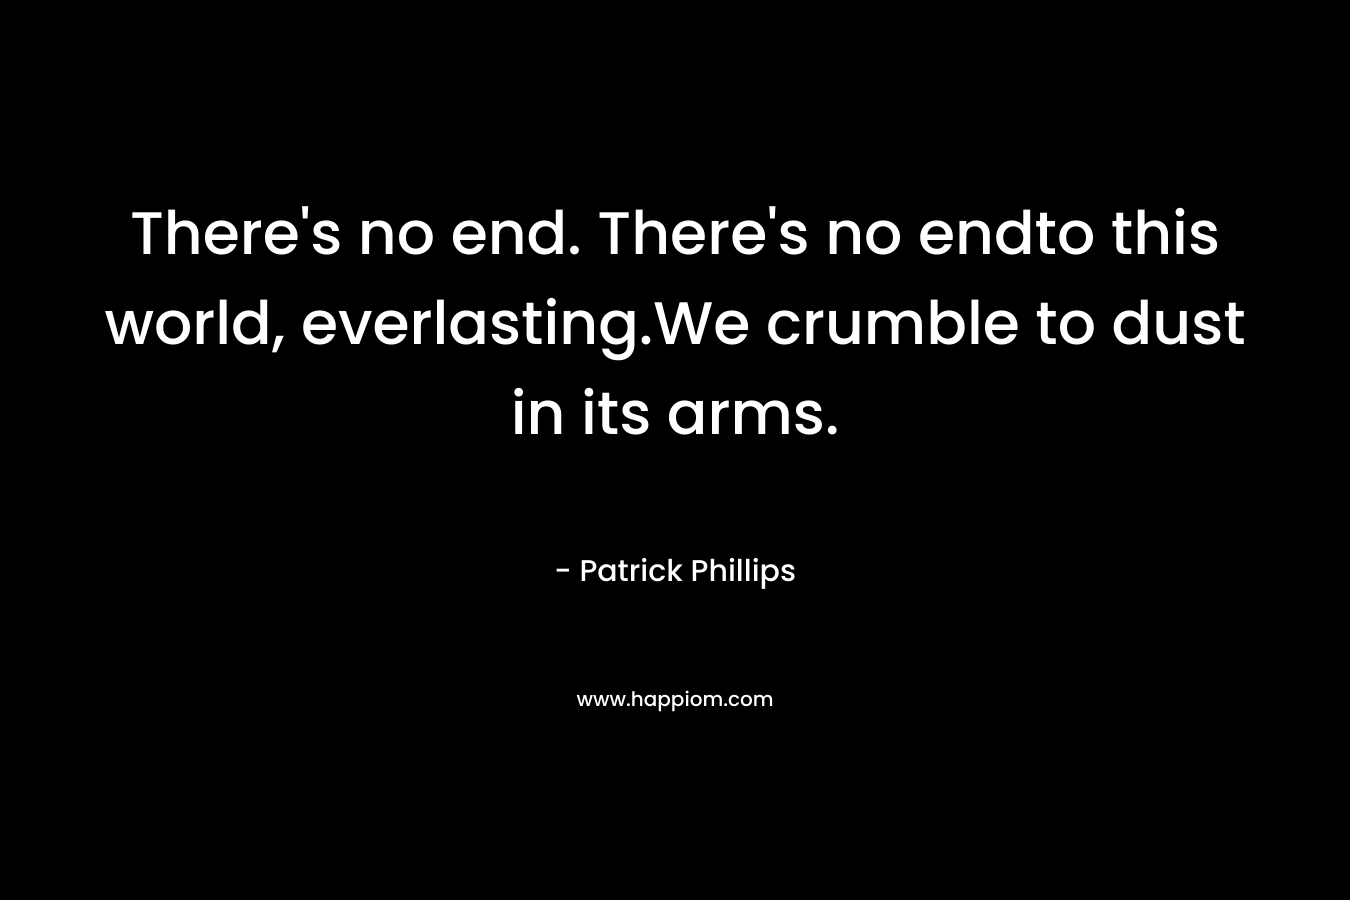 There's no end. There's no endto this world, everlasting.We crumble to dust in its arms.